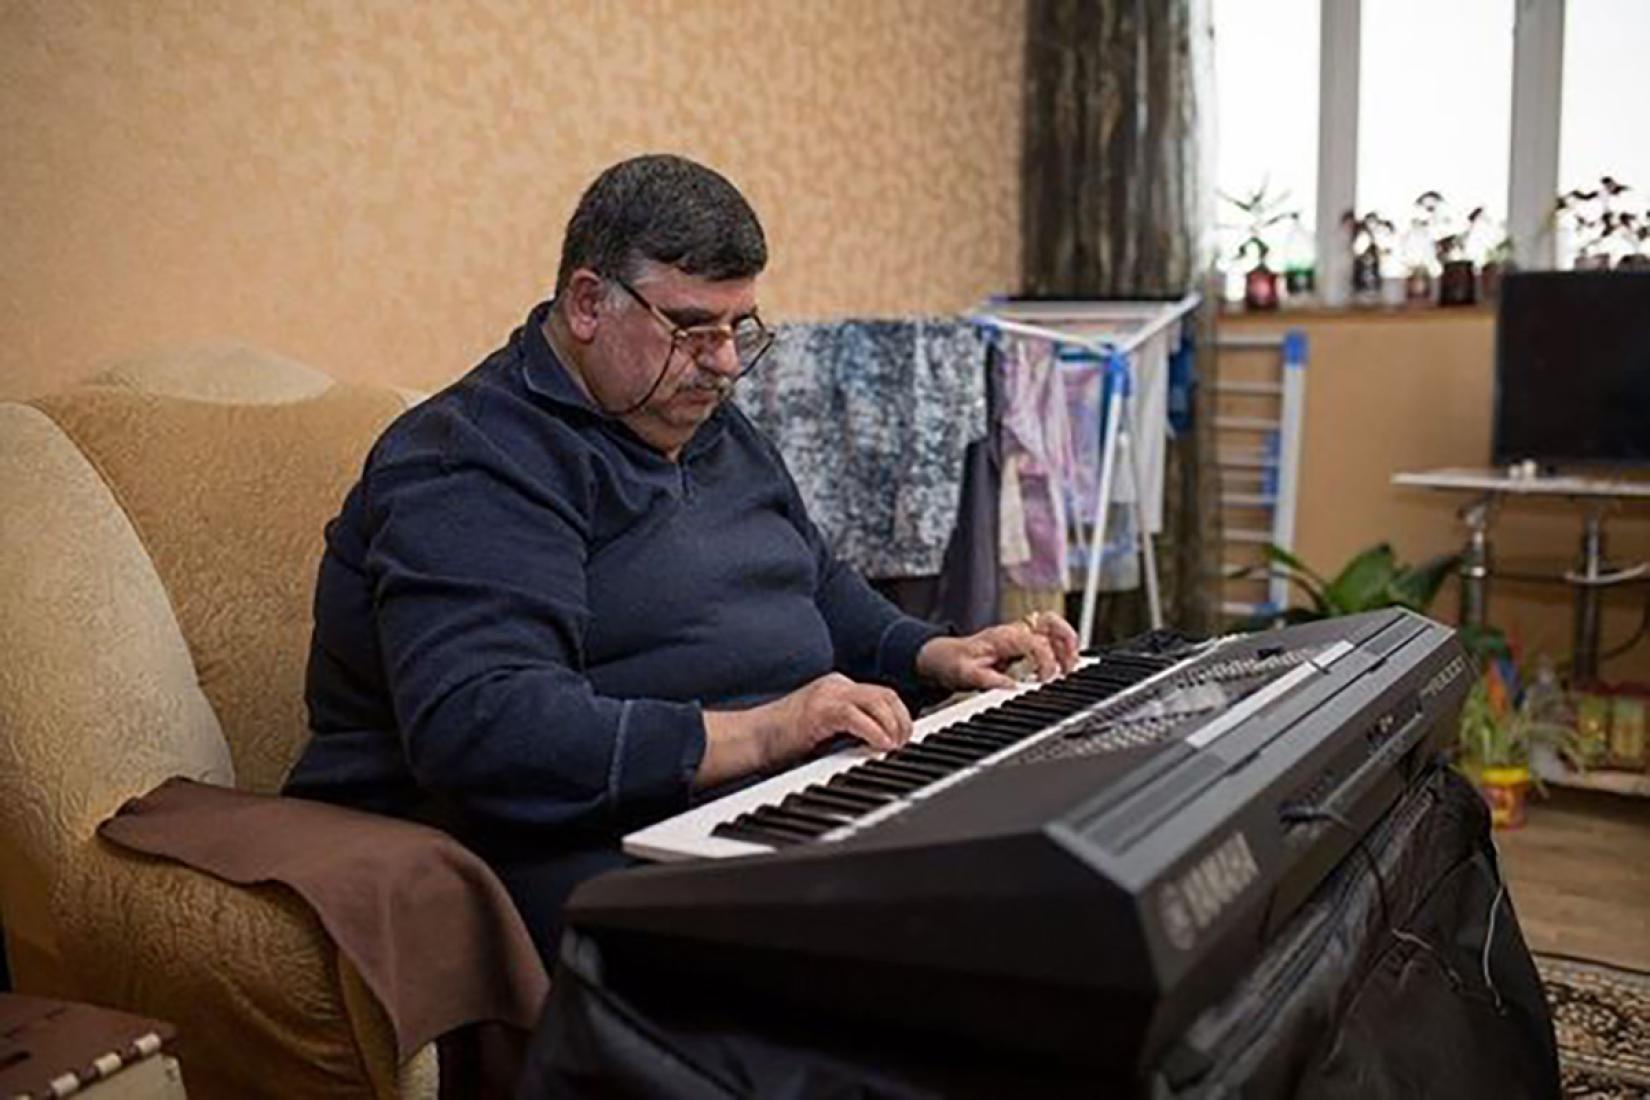 Garo playing a traditional Armenian melody on his keyboard instrument.